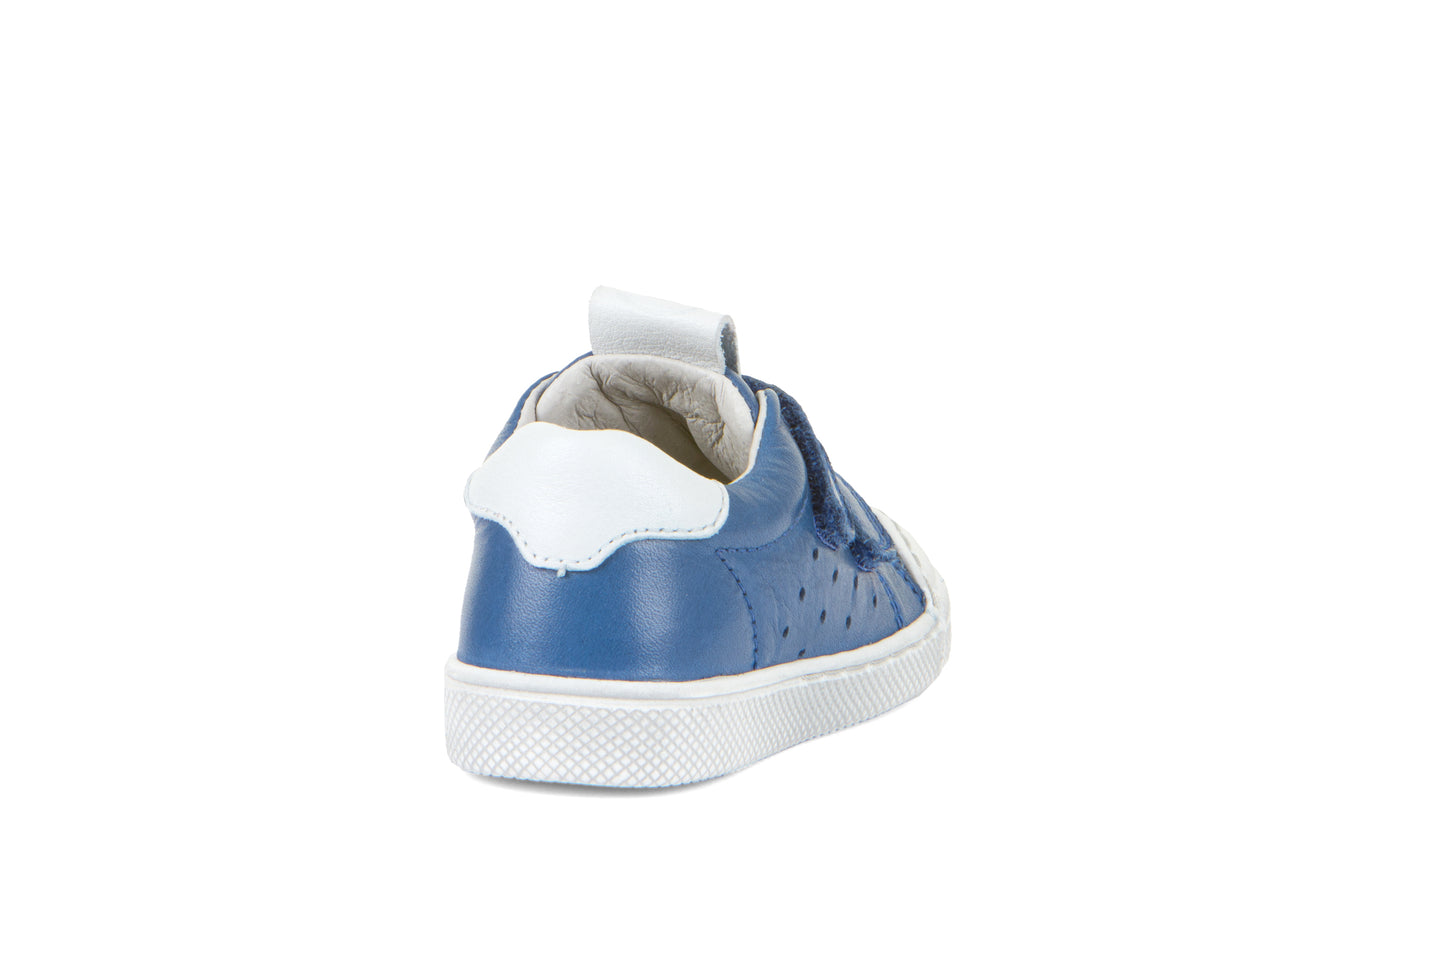 A boys casual shoe by Froddo, style G2130290-1 Rosario, in blue with white trim, velcro fastening. Back view.